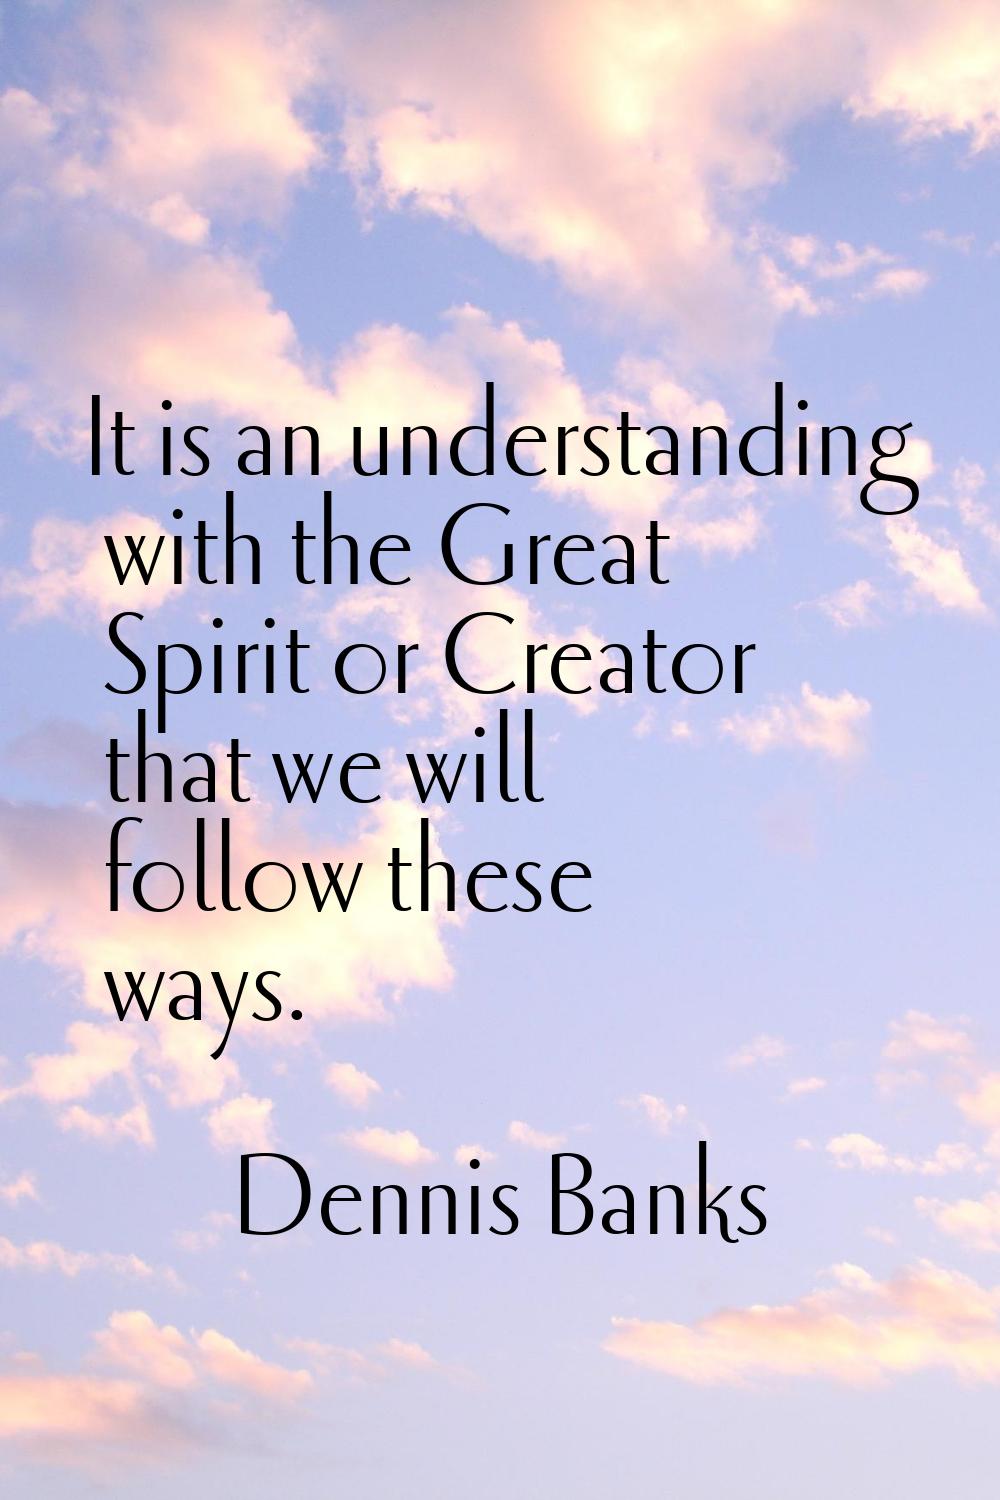 It is an understanding with the Great Spirit or Creator that we will follow these ways.